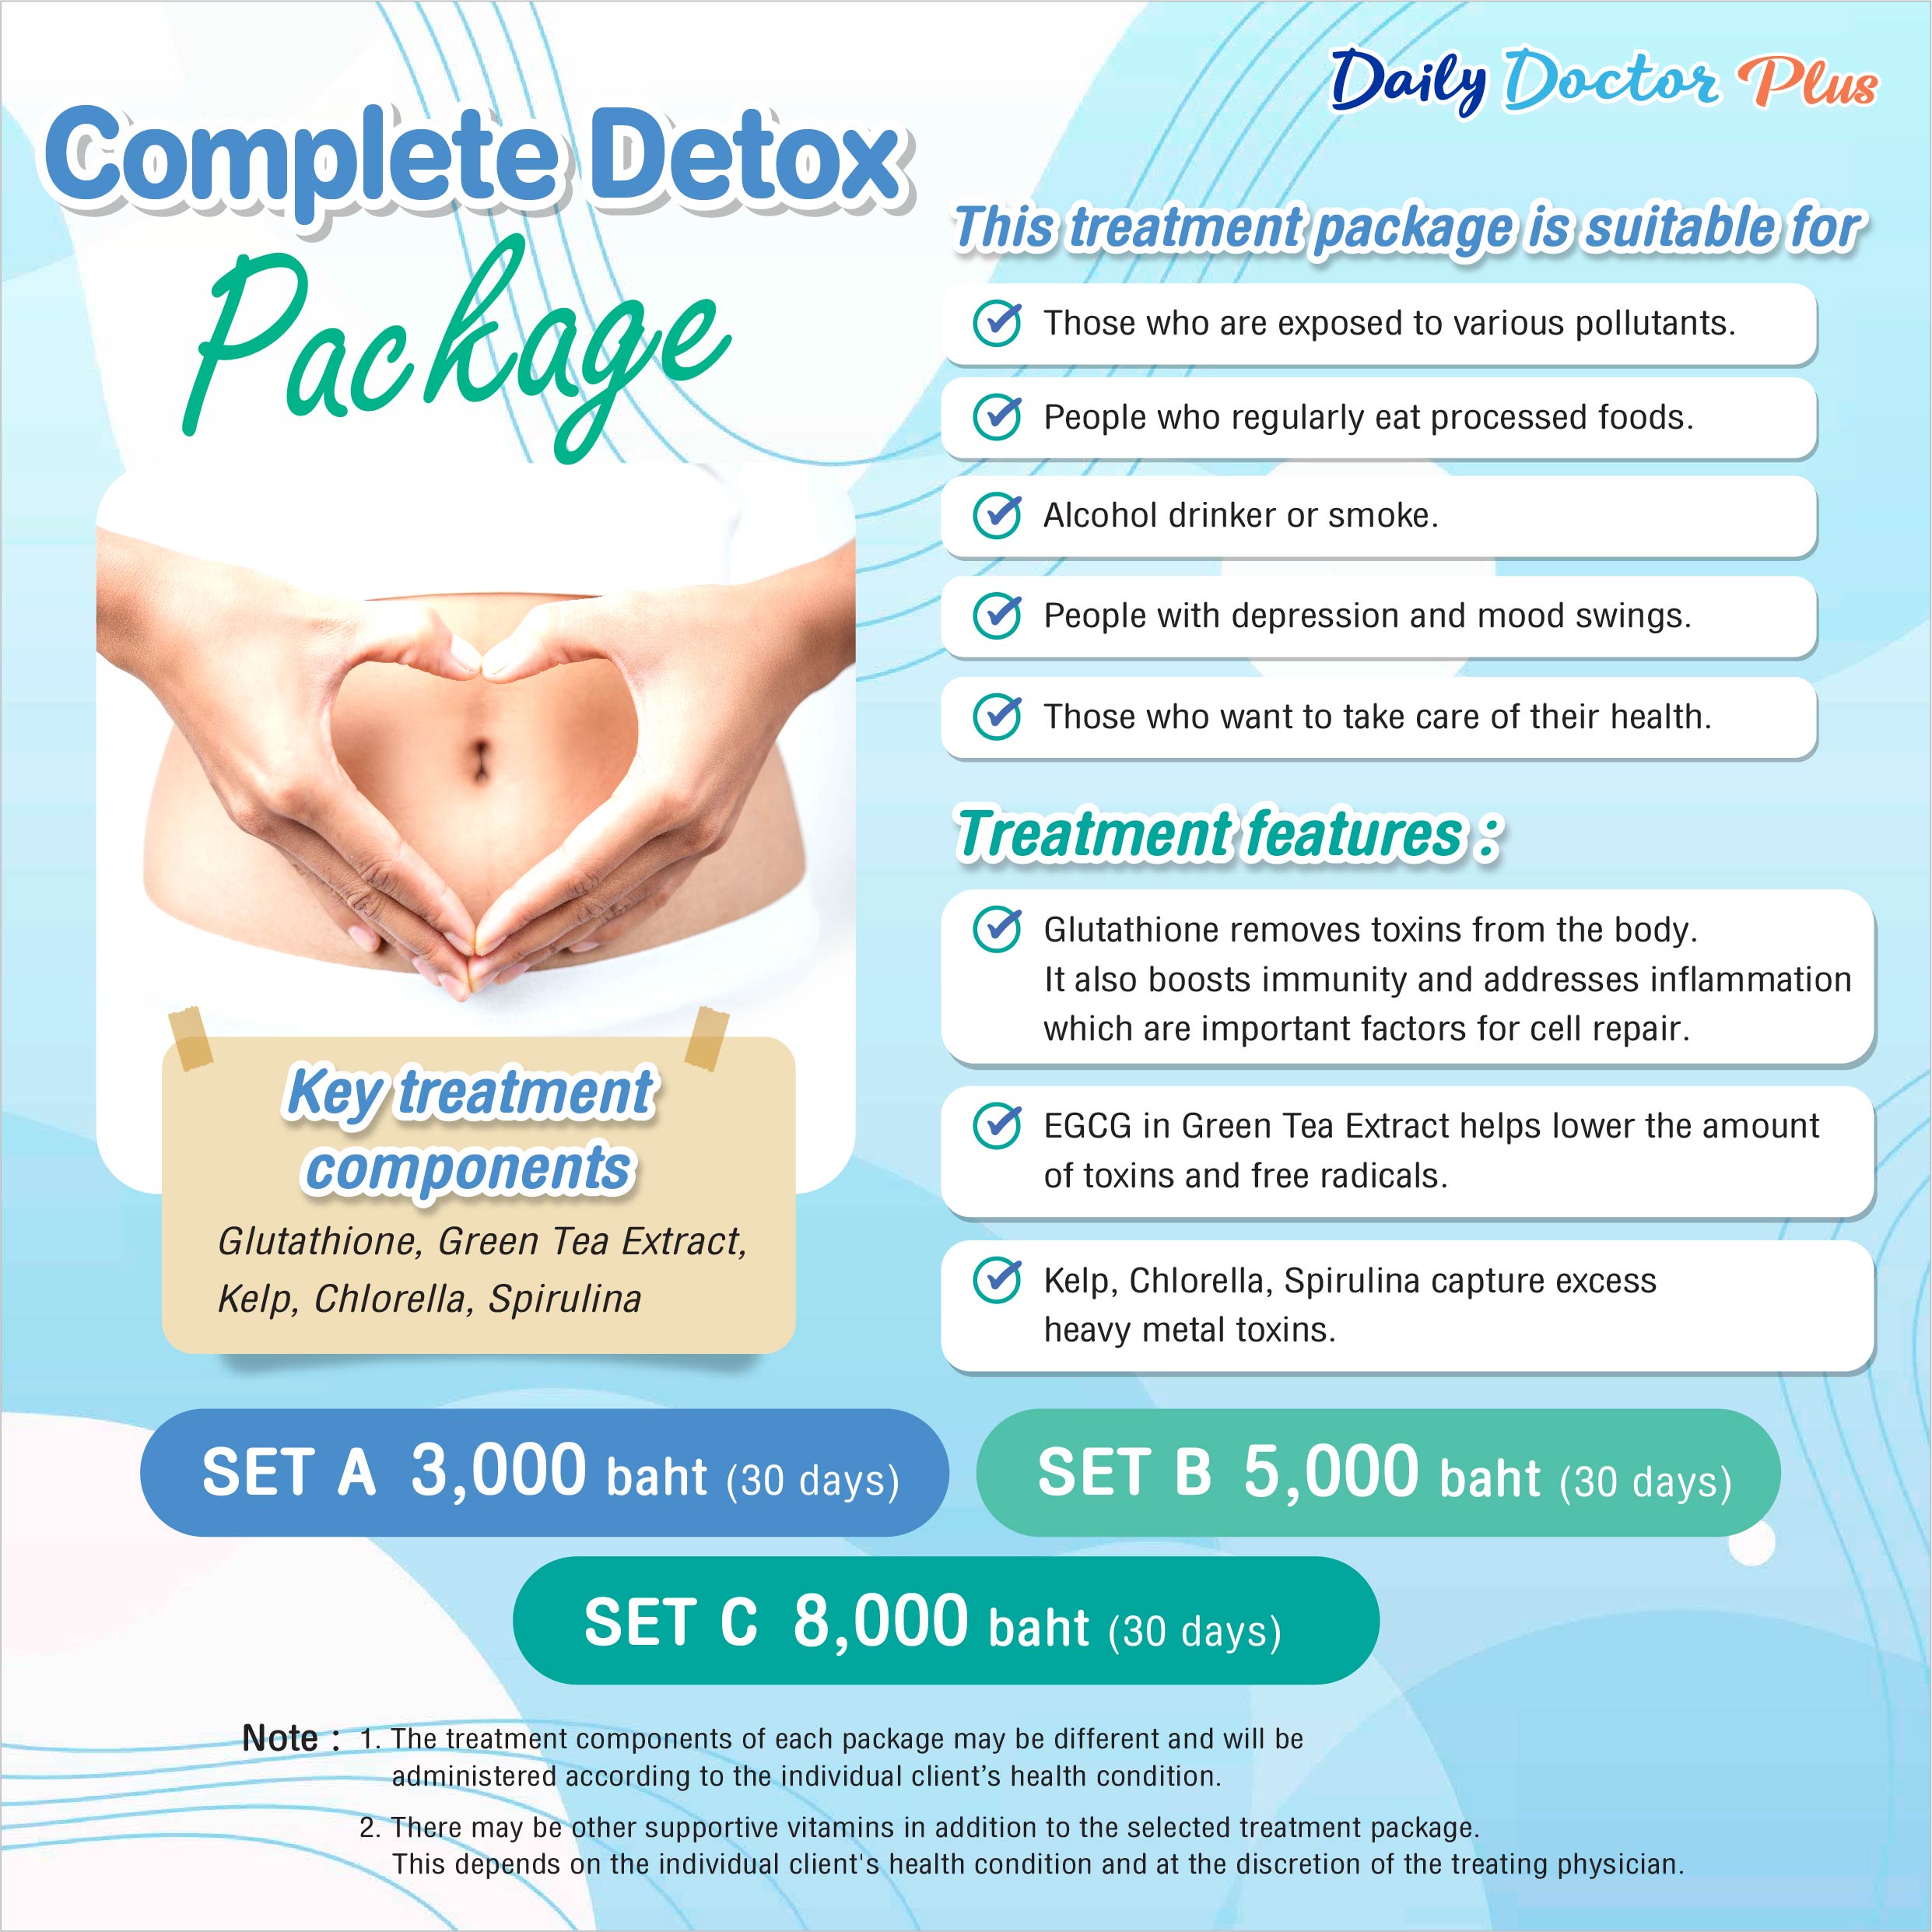 Daily Doctor Plus : Complete Detox Package 